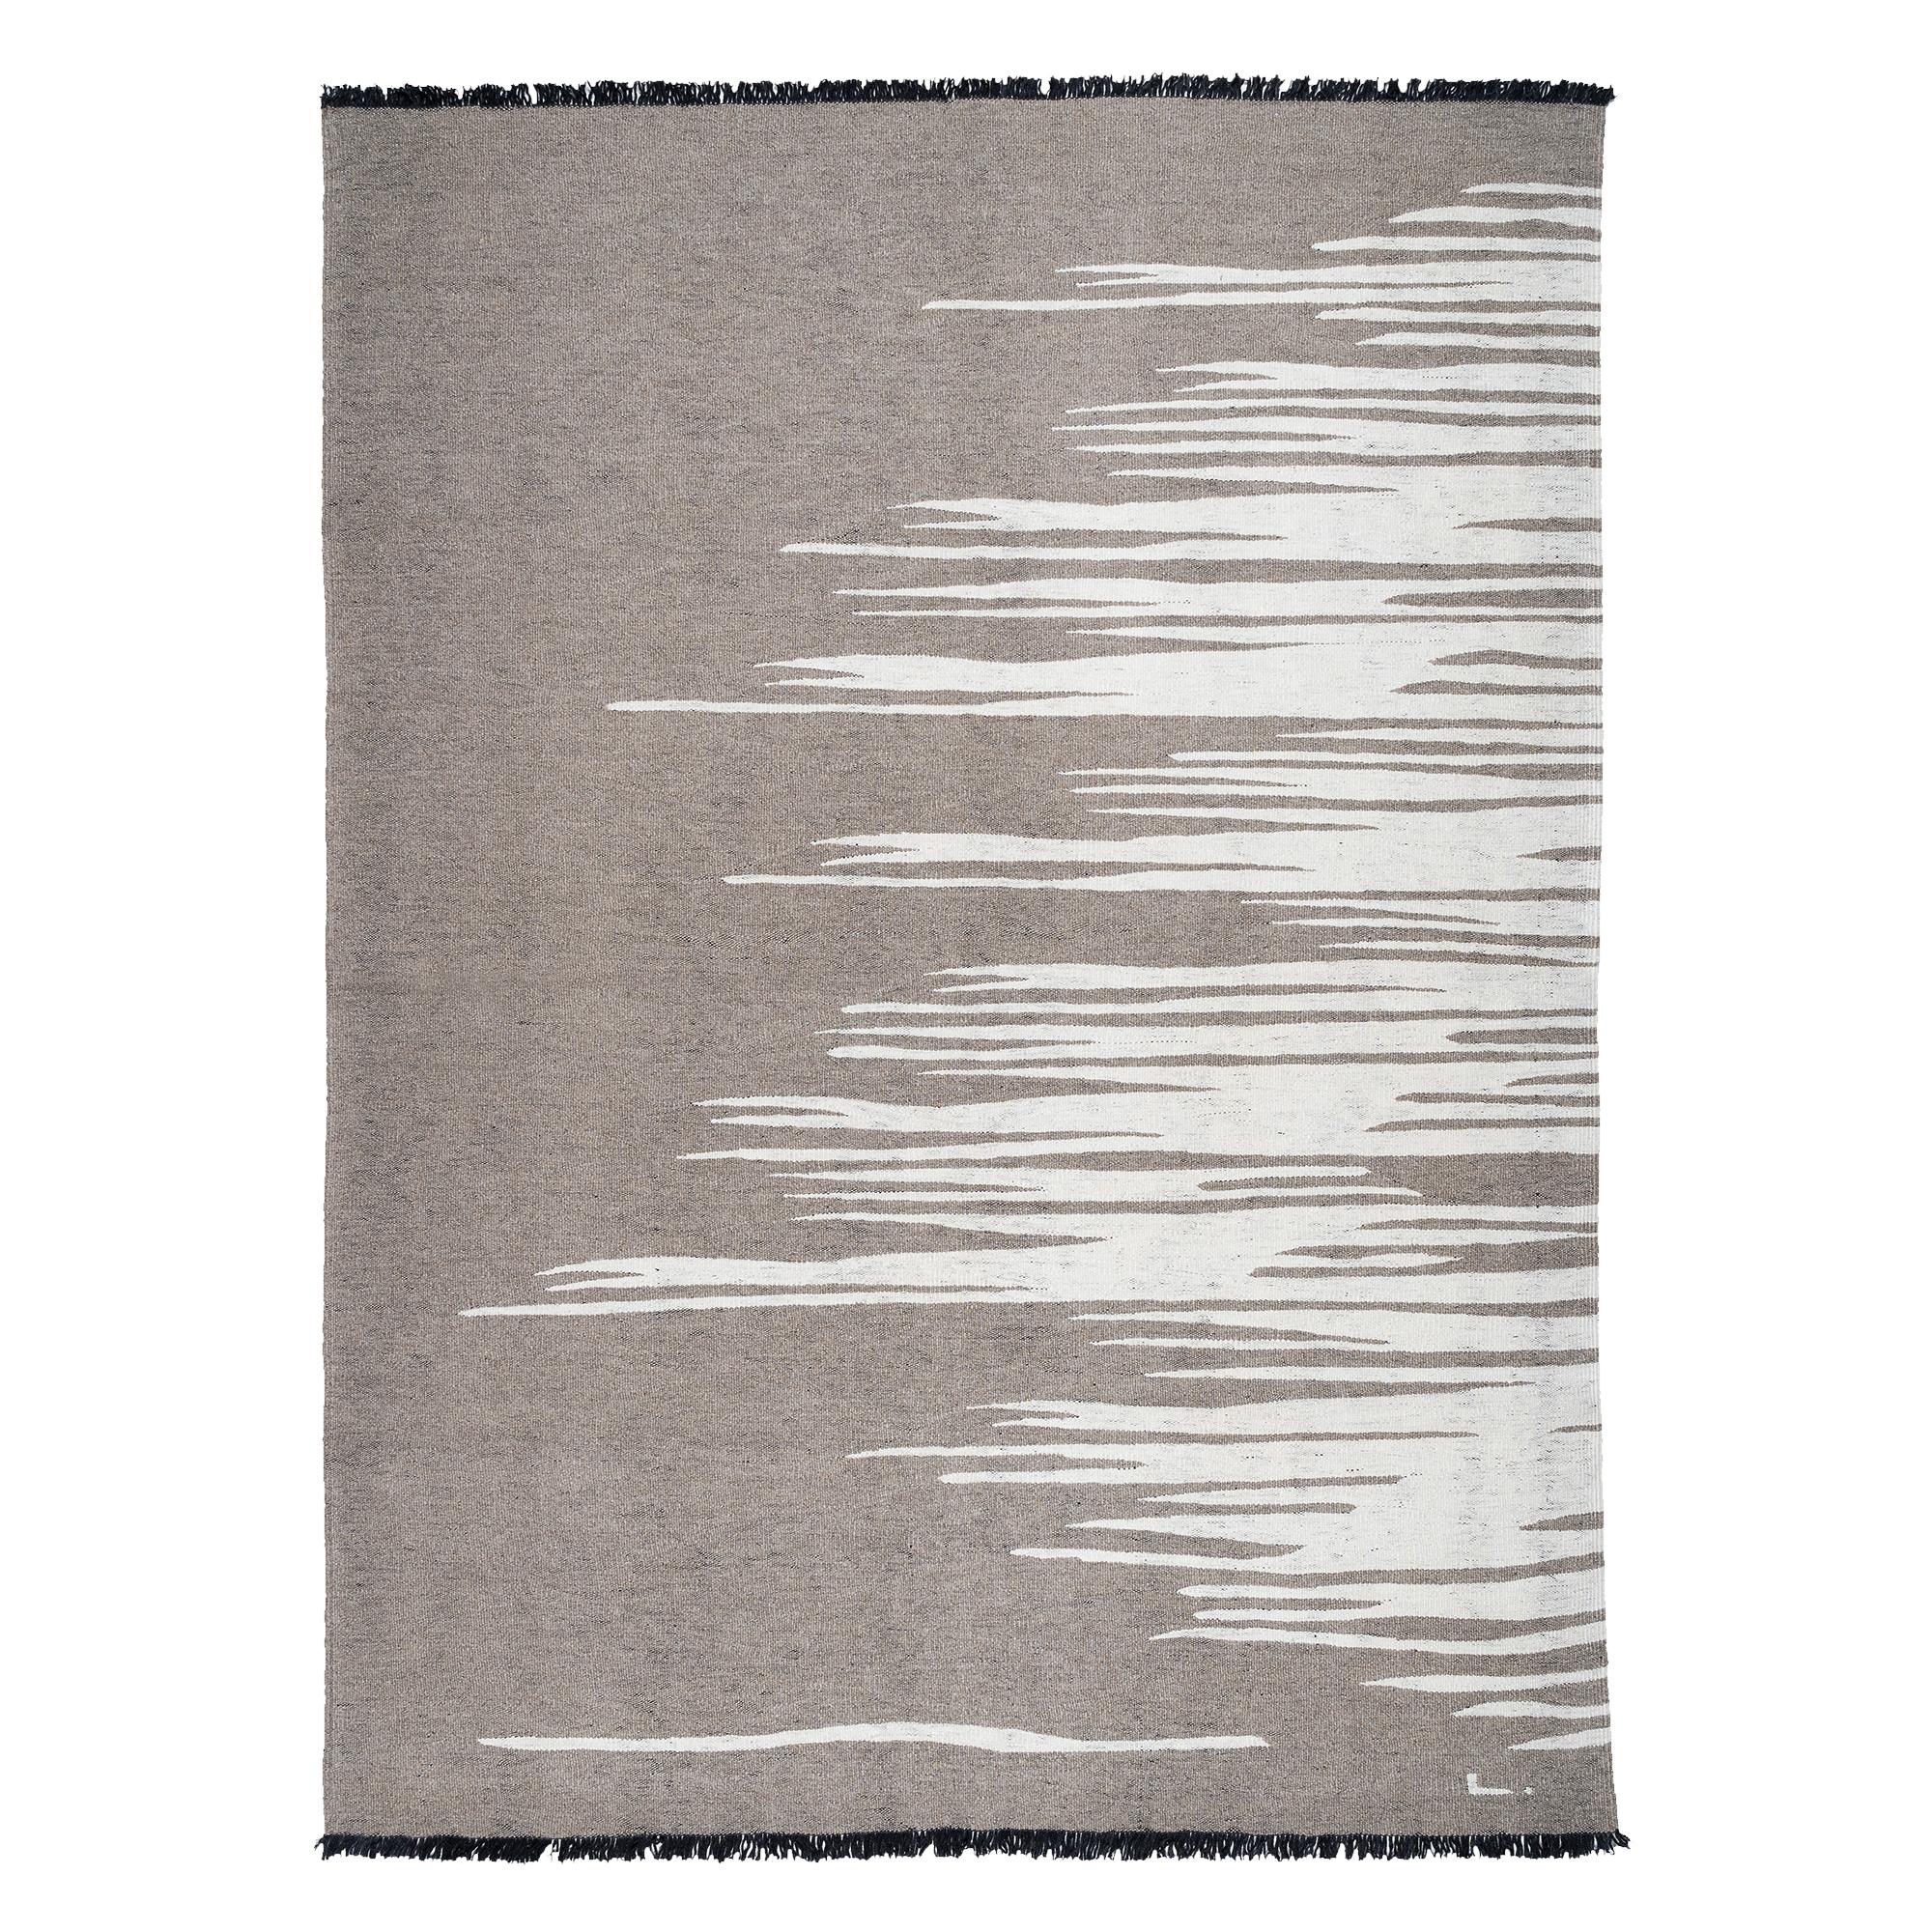 Contemporary Ege No 3 Kilim Rug Wool Handwoven Dune White - Earthy Gray Made to Order For Sale